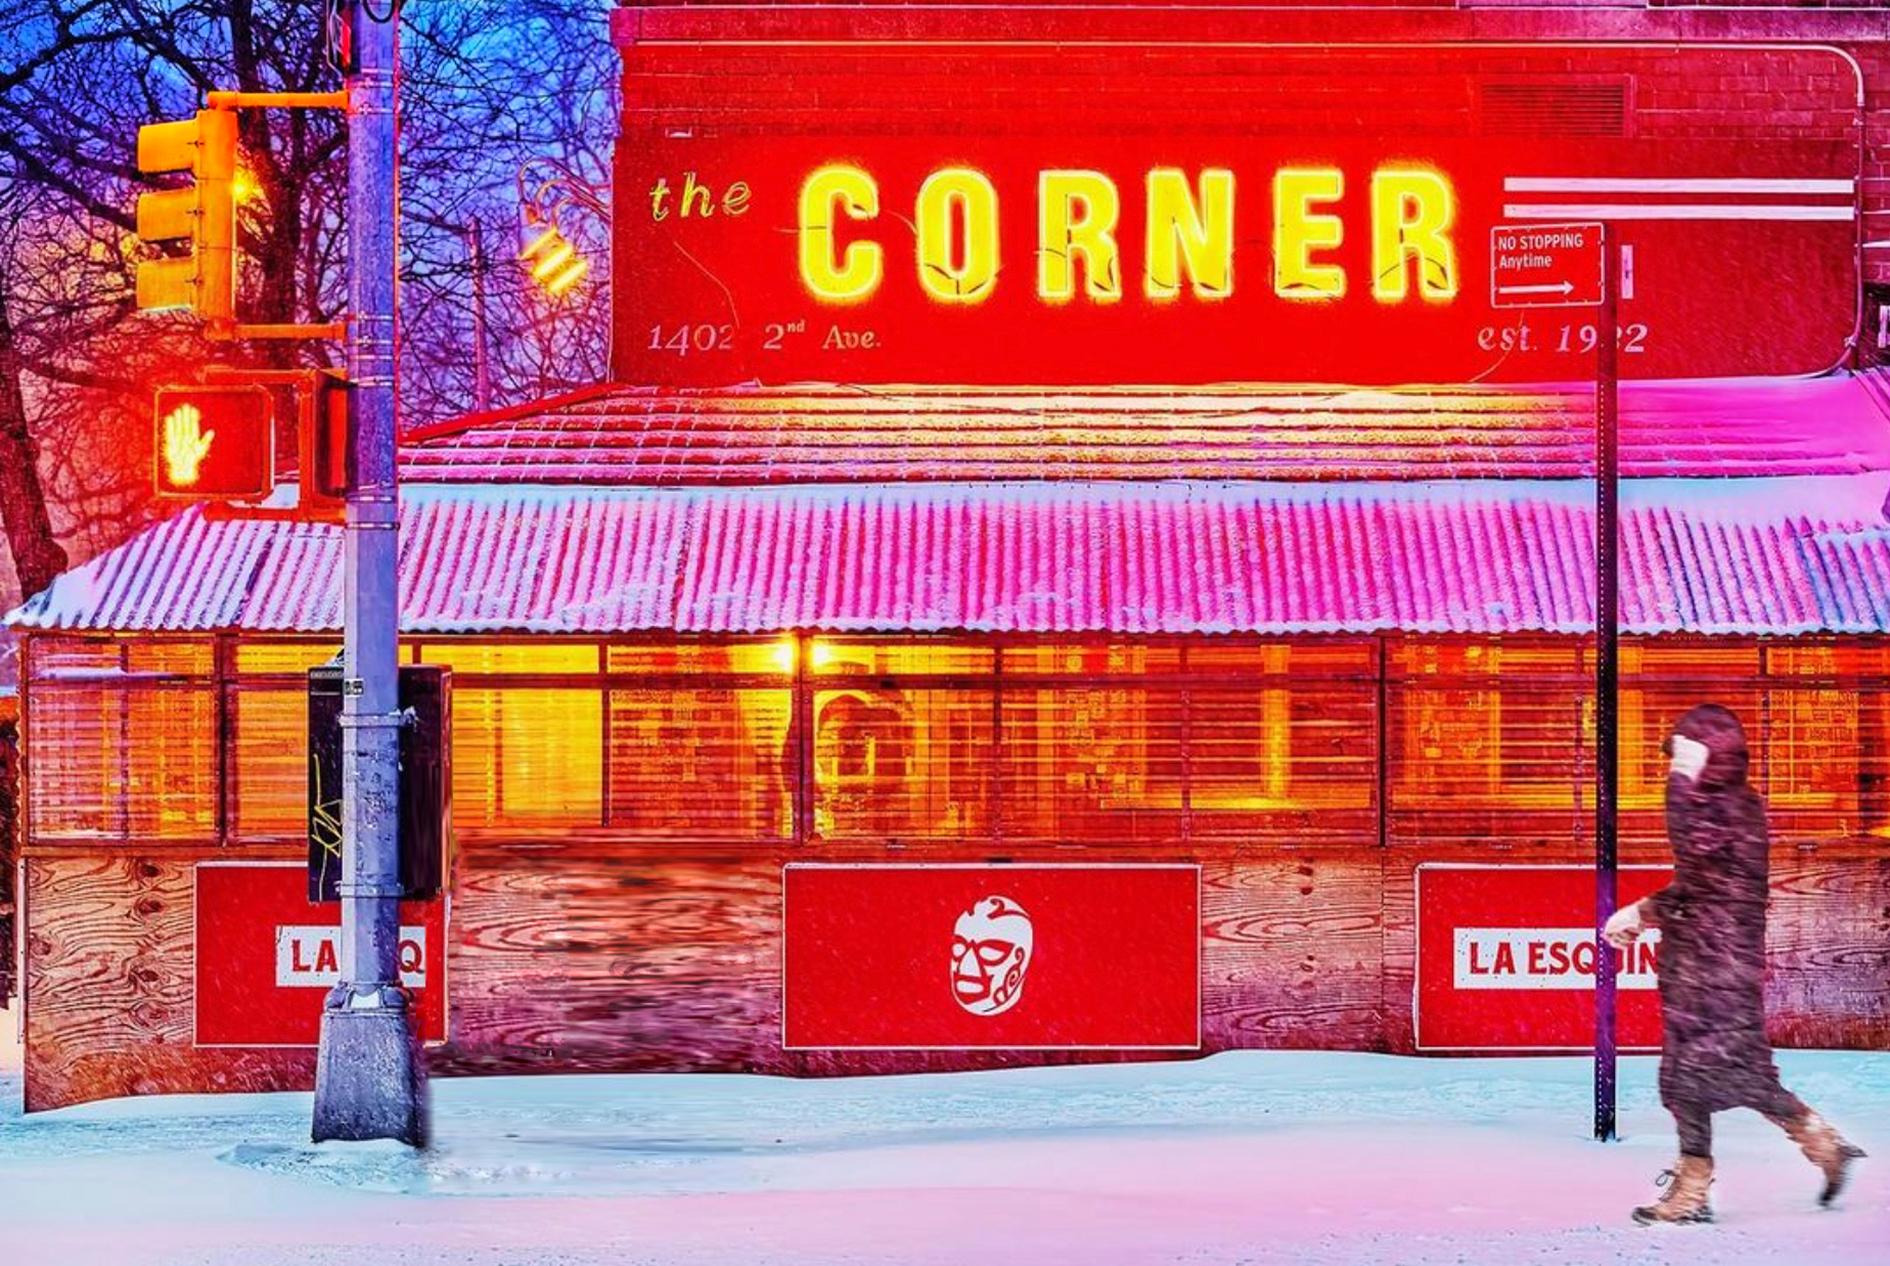 Mitchell Funk Color Photograph - Manhattan Street Scene with Neon. 